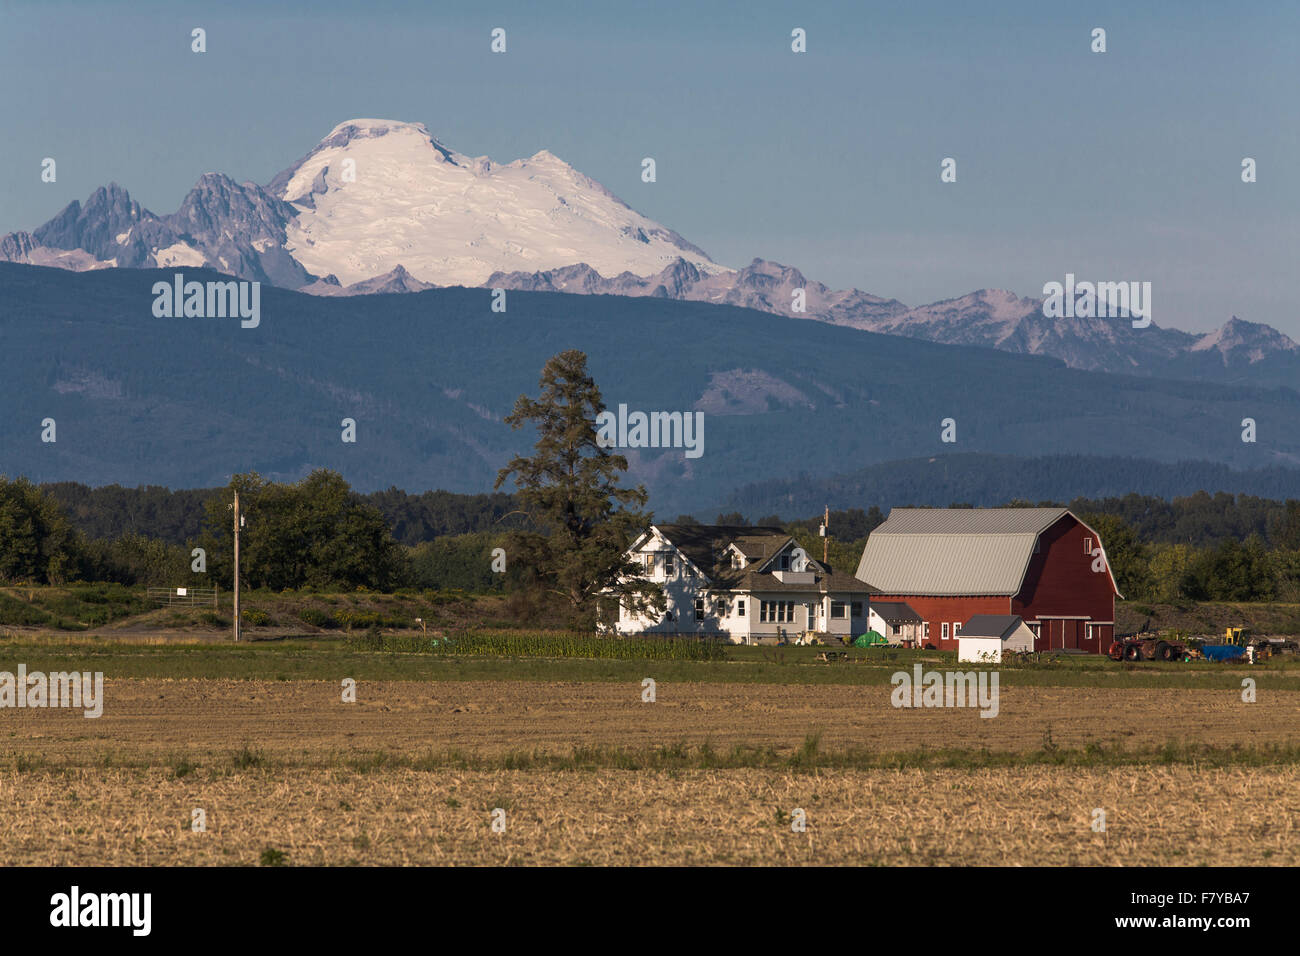 Mt Baker with a farmhouse and barn in the foreground. Stock Photo